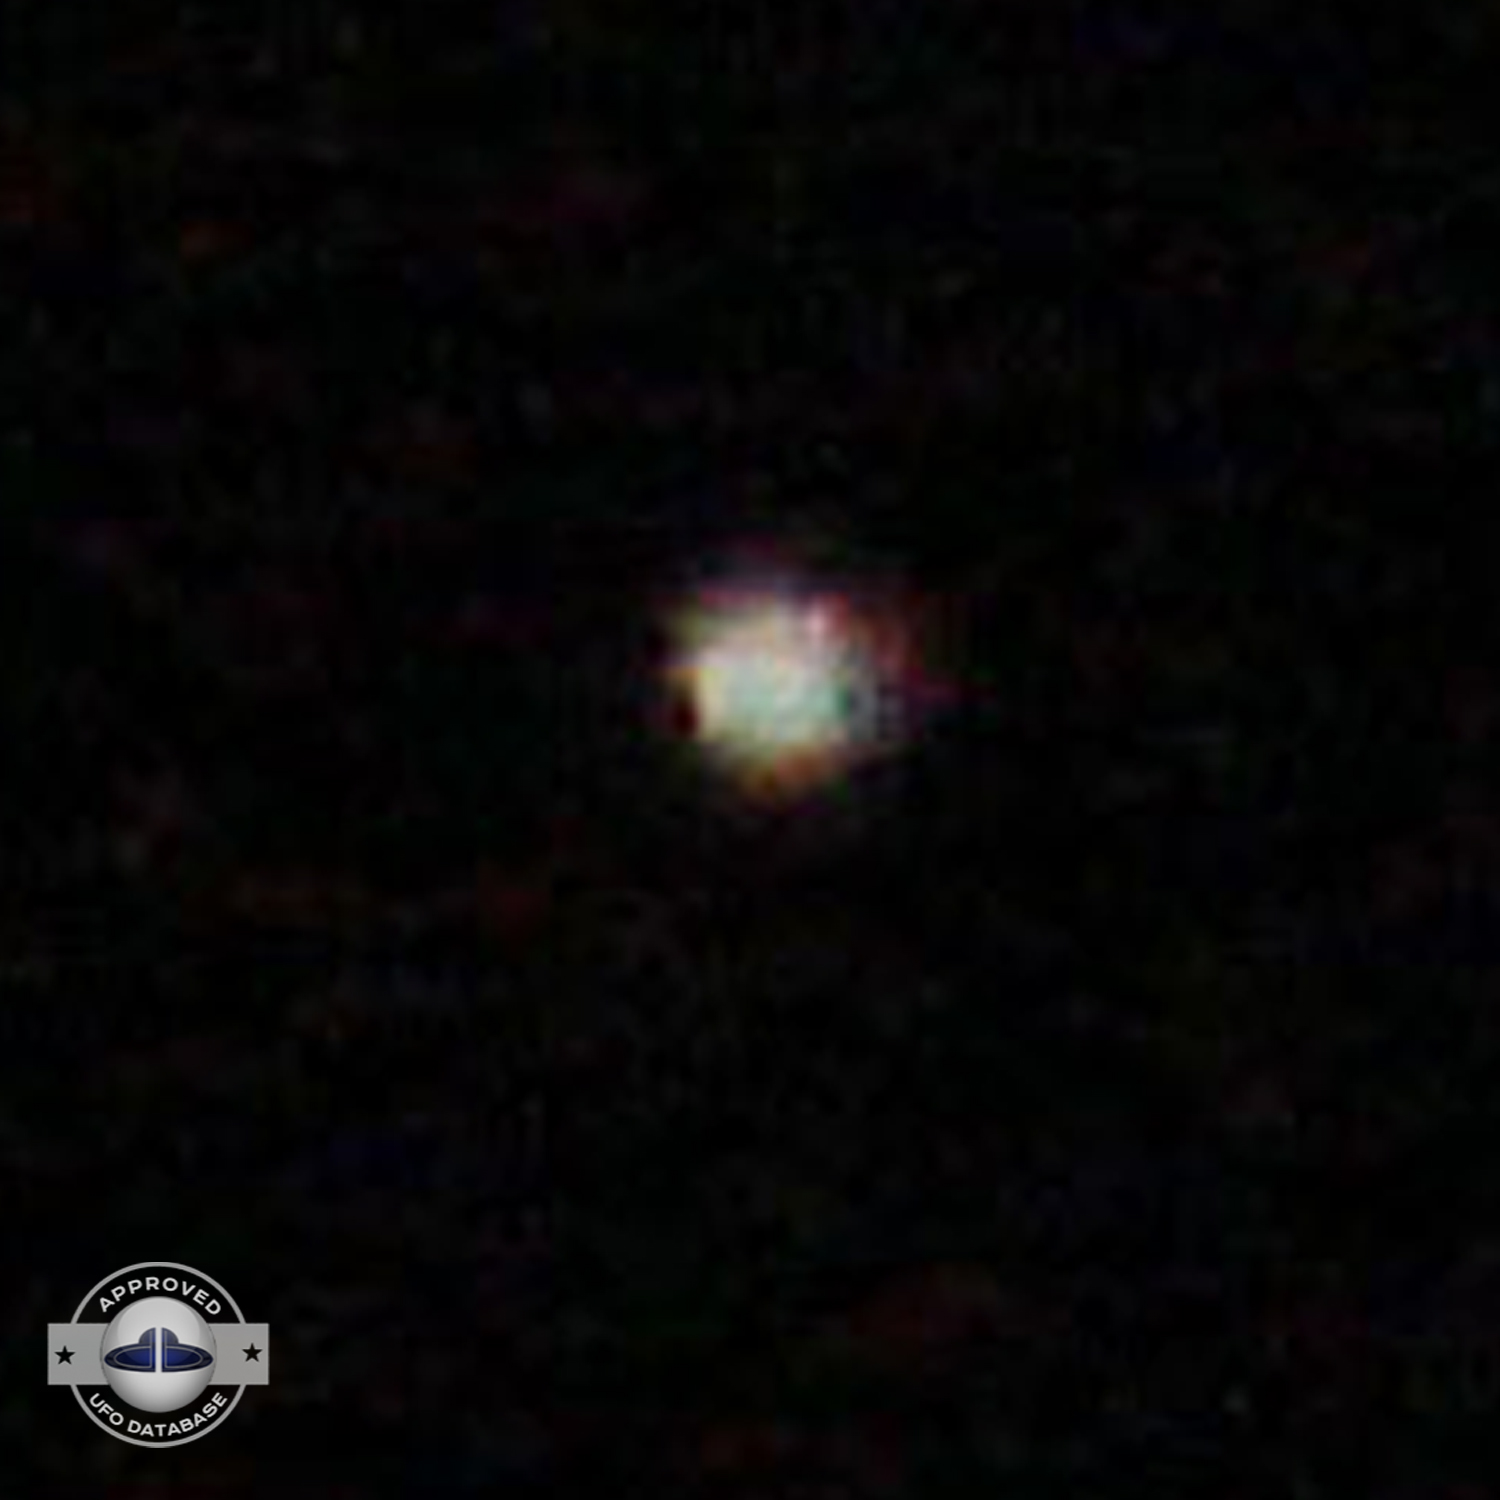 Citizen of India scared of being abducted by UFO | Kochi, India 2010 UFO Picture #217-4